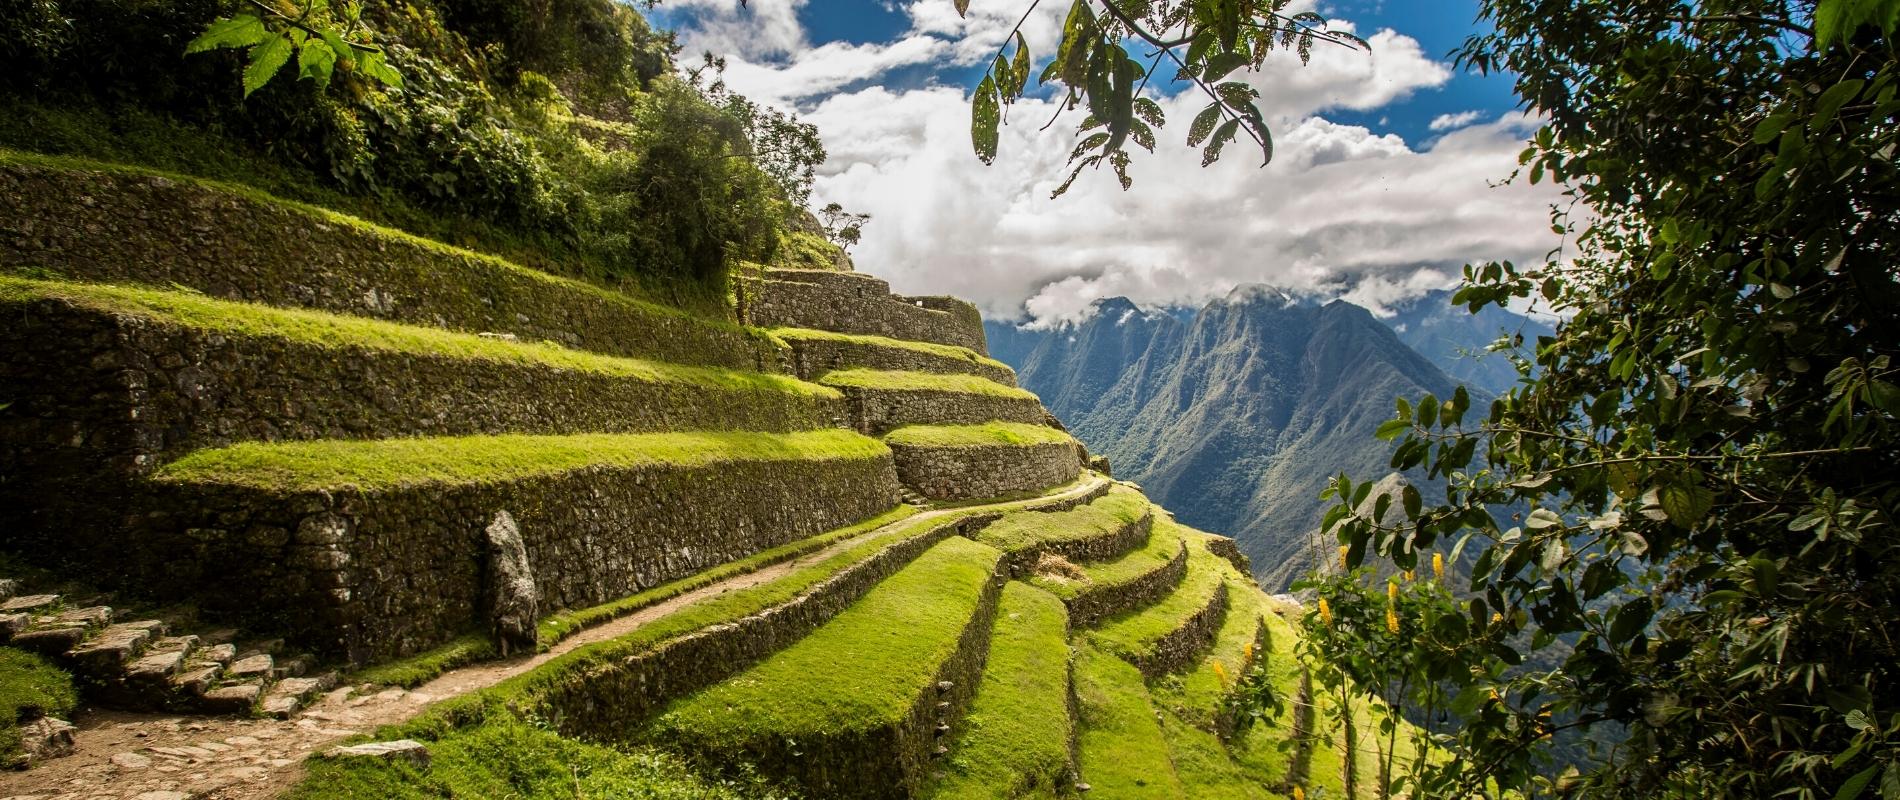 6.- WHAT IS THE BEST SEASON TO DO THE INCA TRAIL?